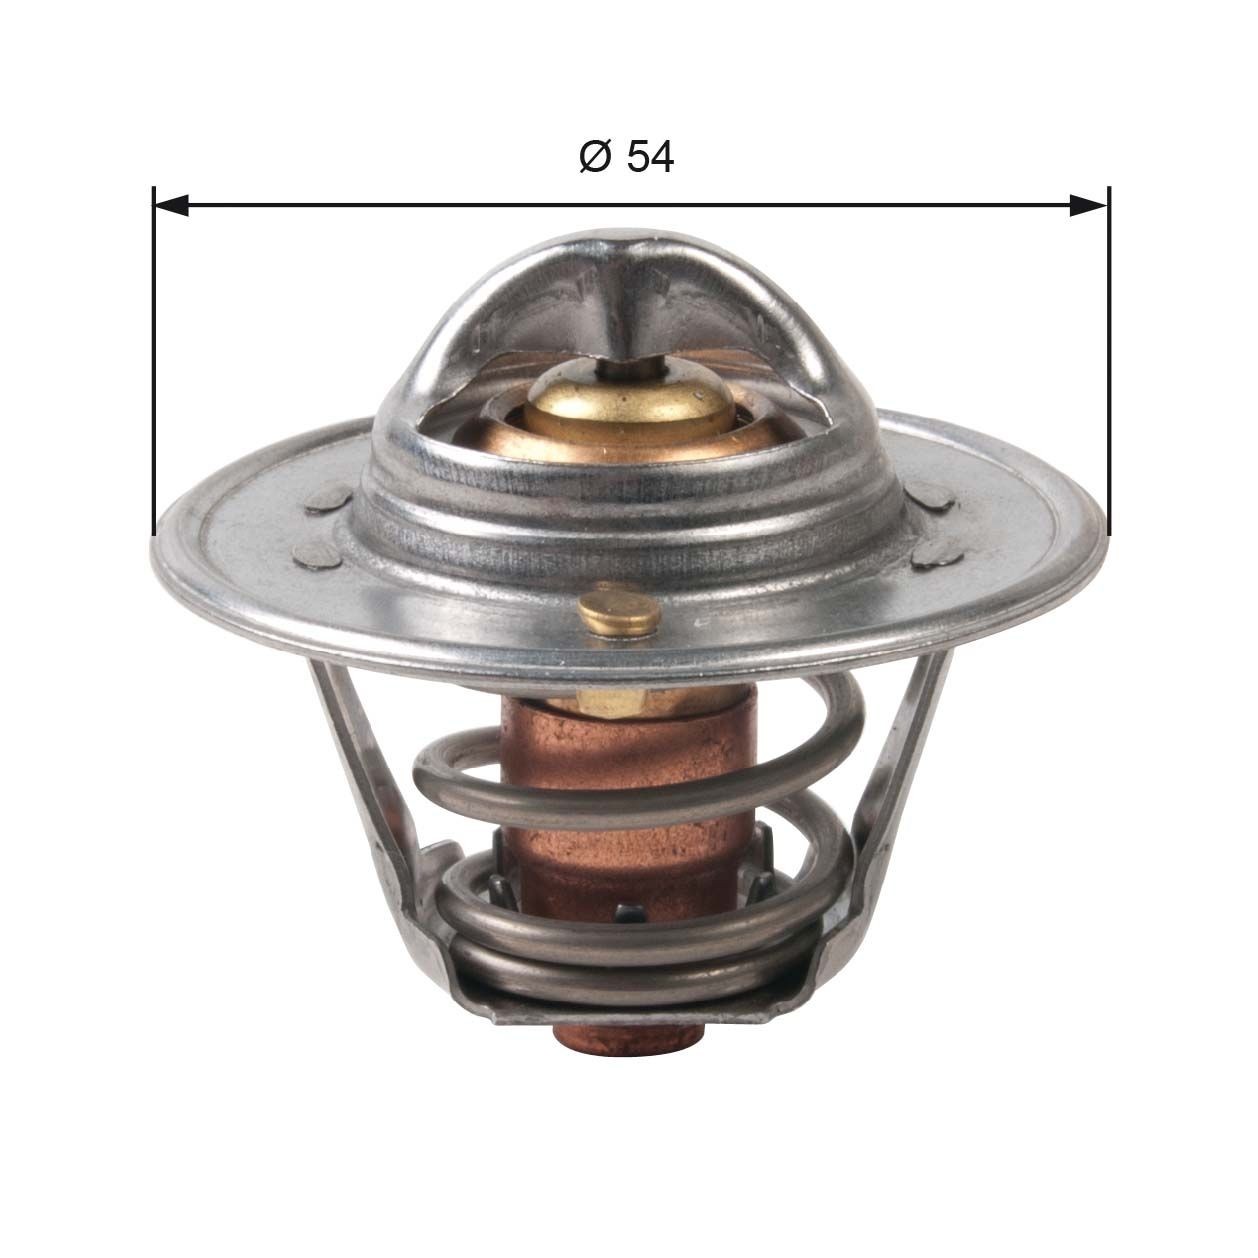 GATES TH45790G1 Engine thermostat Opening Temperature: 90°C, with gaskets/seals, without housing